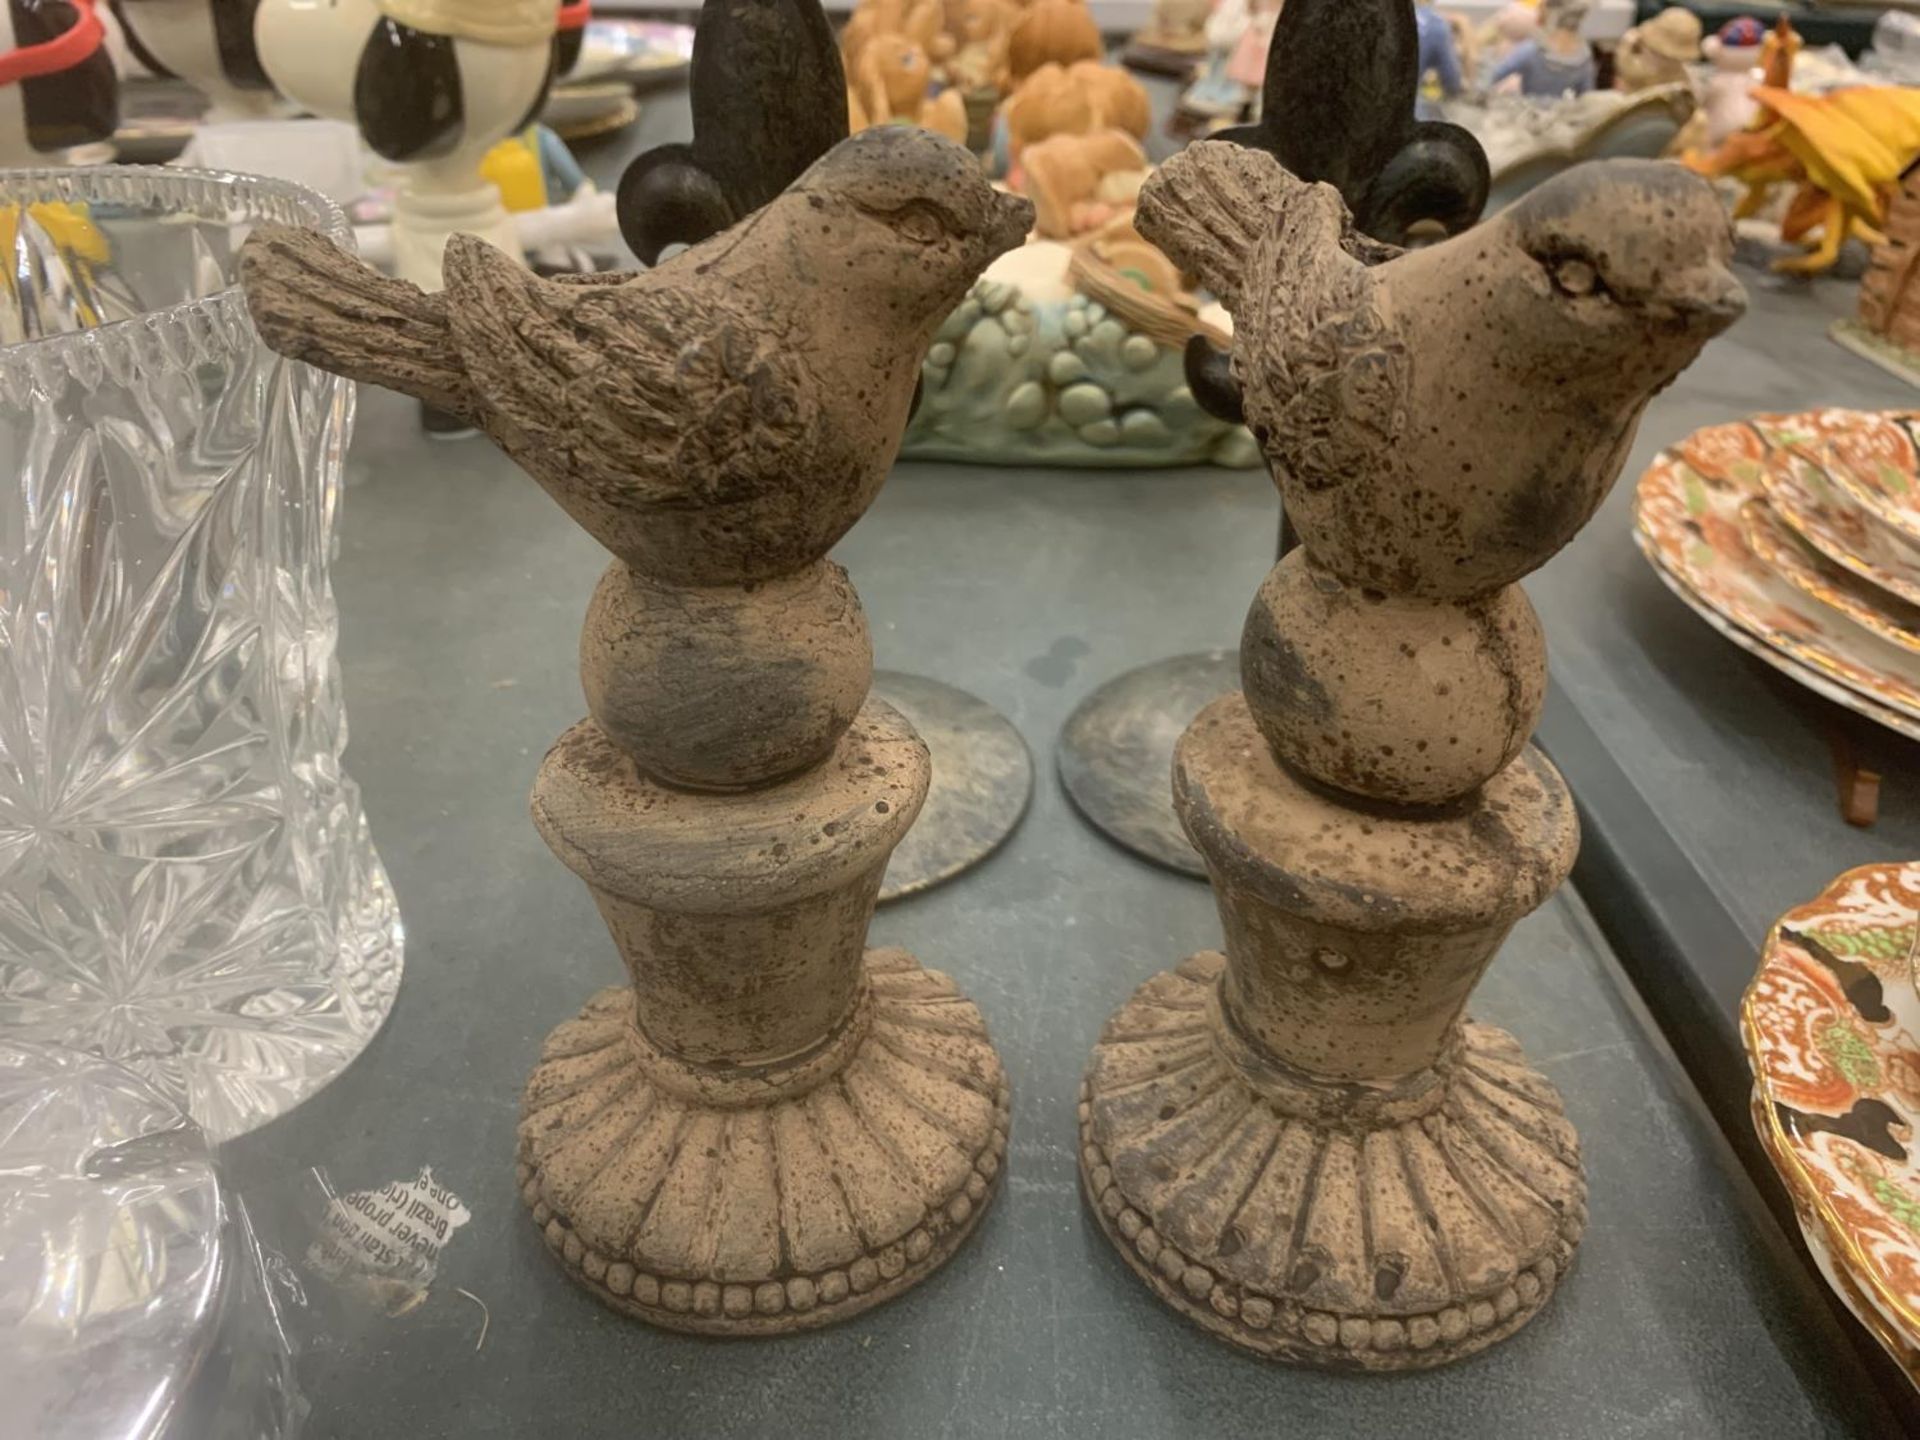 A PAIR OF METAL CANDLESTICKS WITH FLEUR-DU-LYS DECORATION AND A PAIR OF STONE BIRD FIGURES - Image 2 of 3